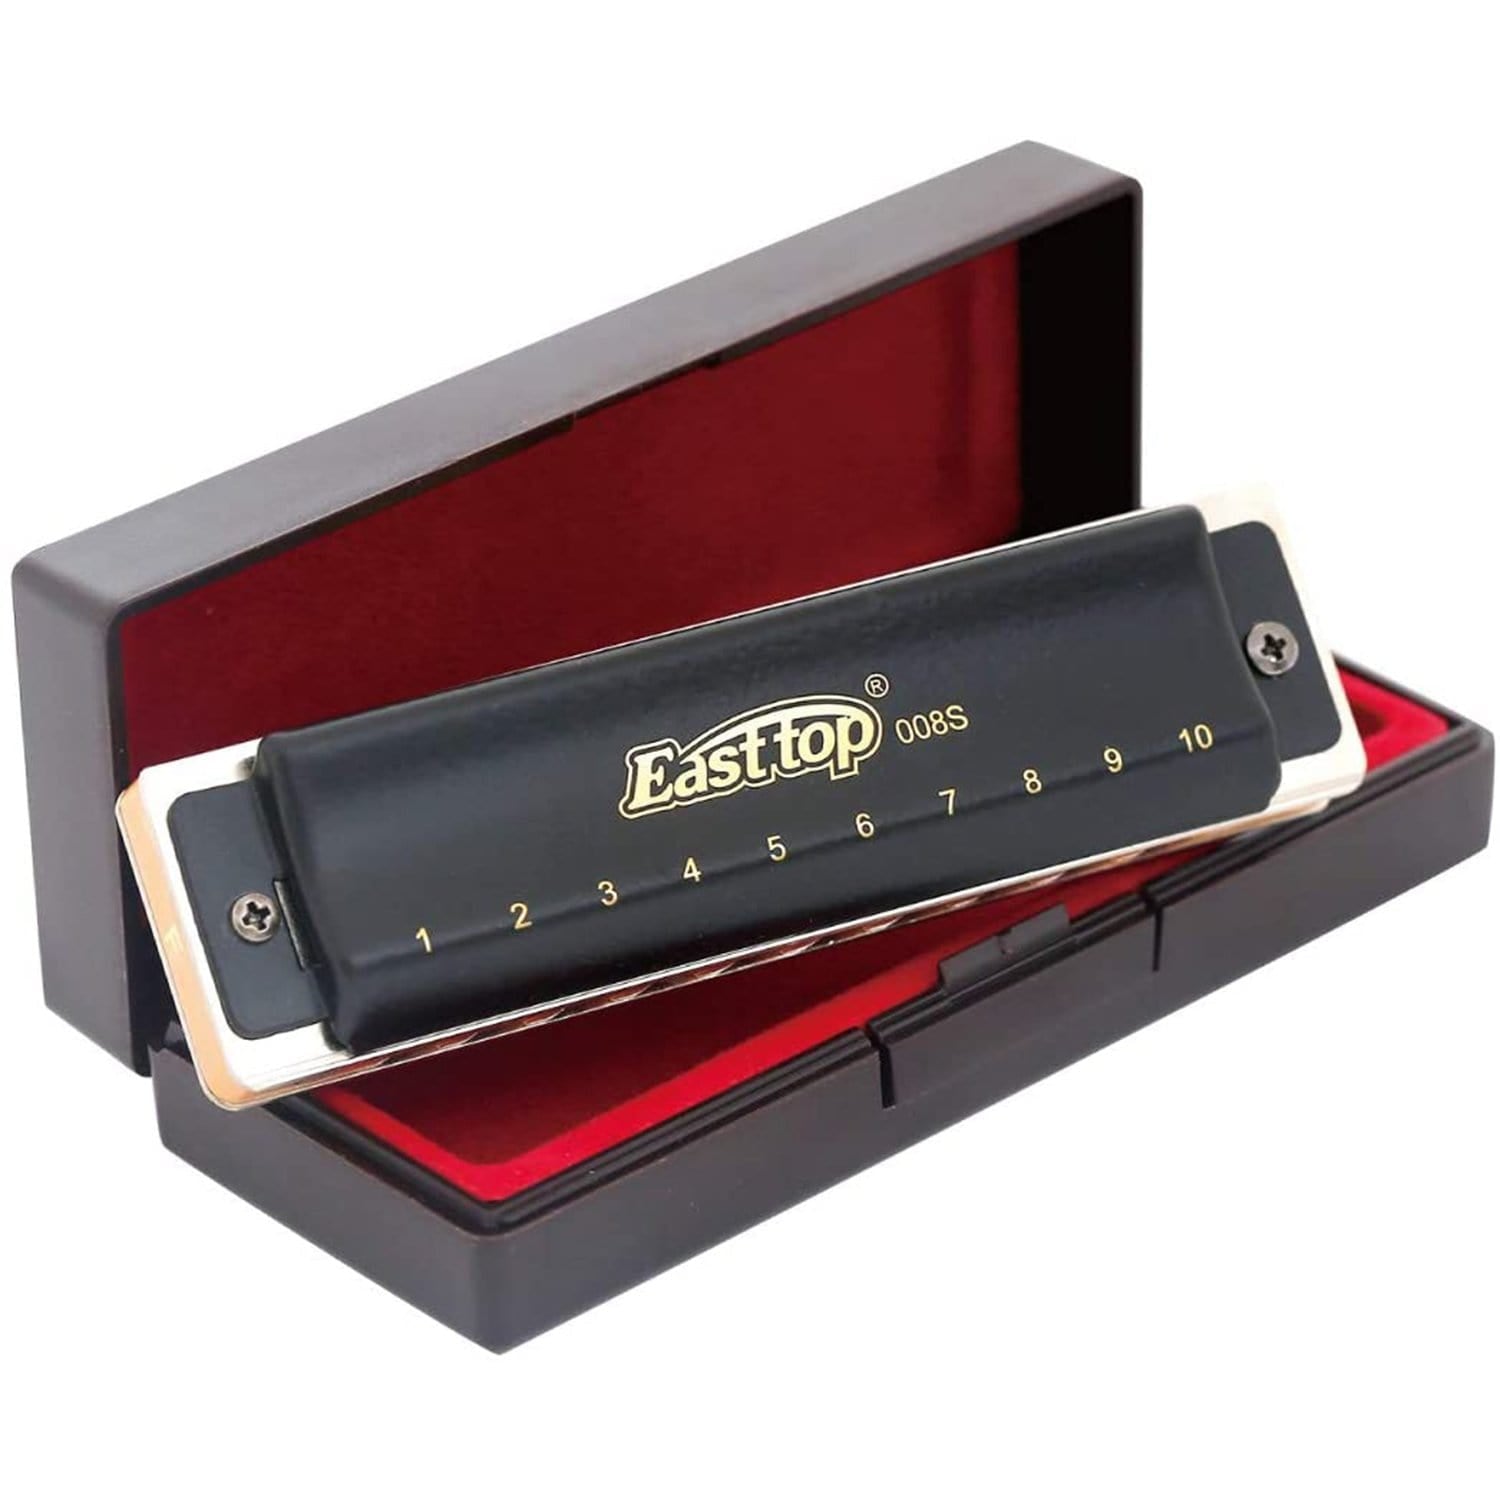 East top Harmonica, Advanced Diatonic Harmonica,Major 12 Keys Available,10 Holes Blues Harp Mouth Organ Harmonica with Silver Cover, Blues Harmonicas For Adults, Professionals and Students(T008S) - Easttop harmonica